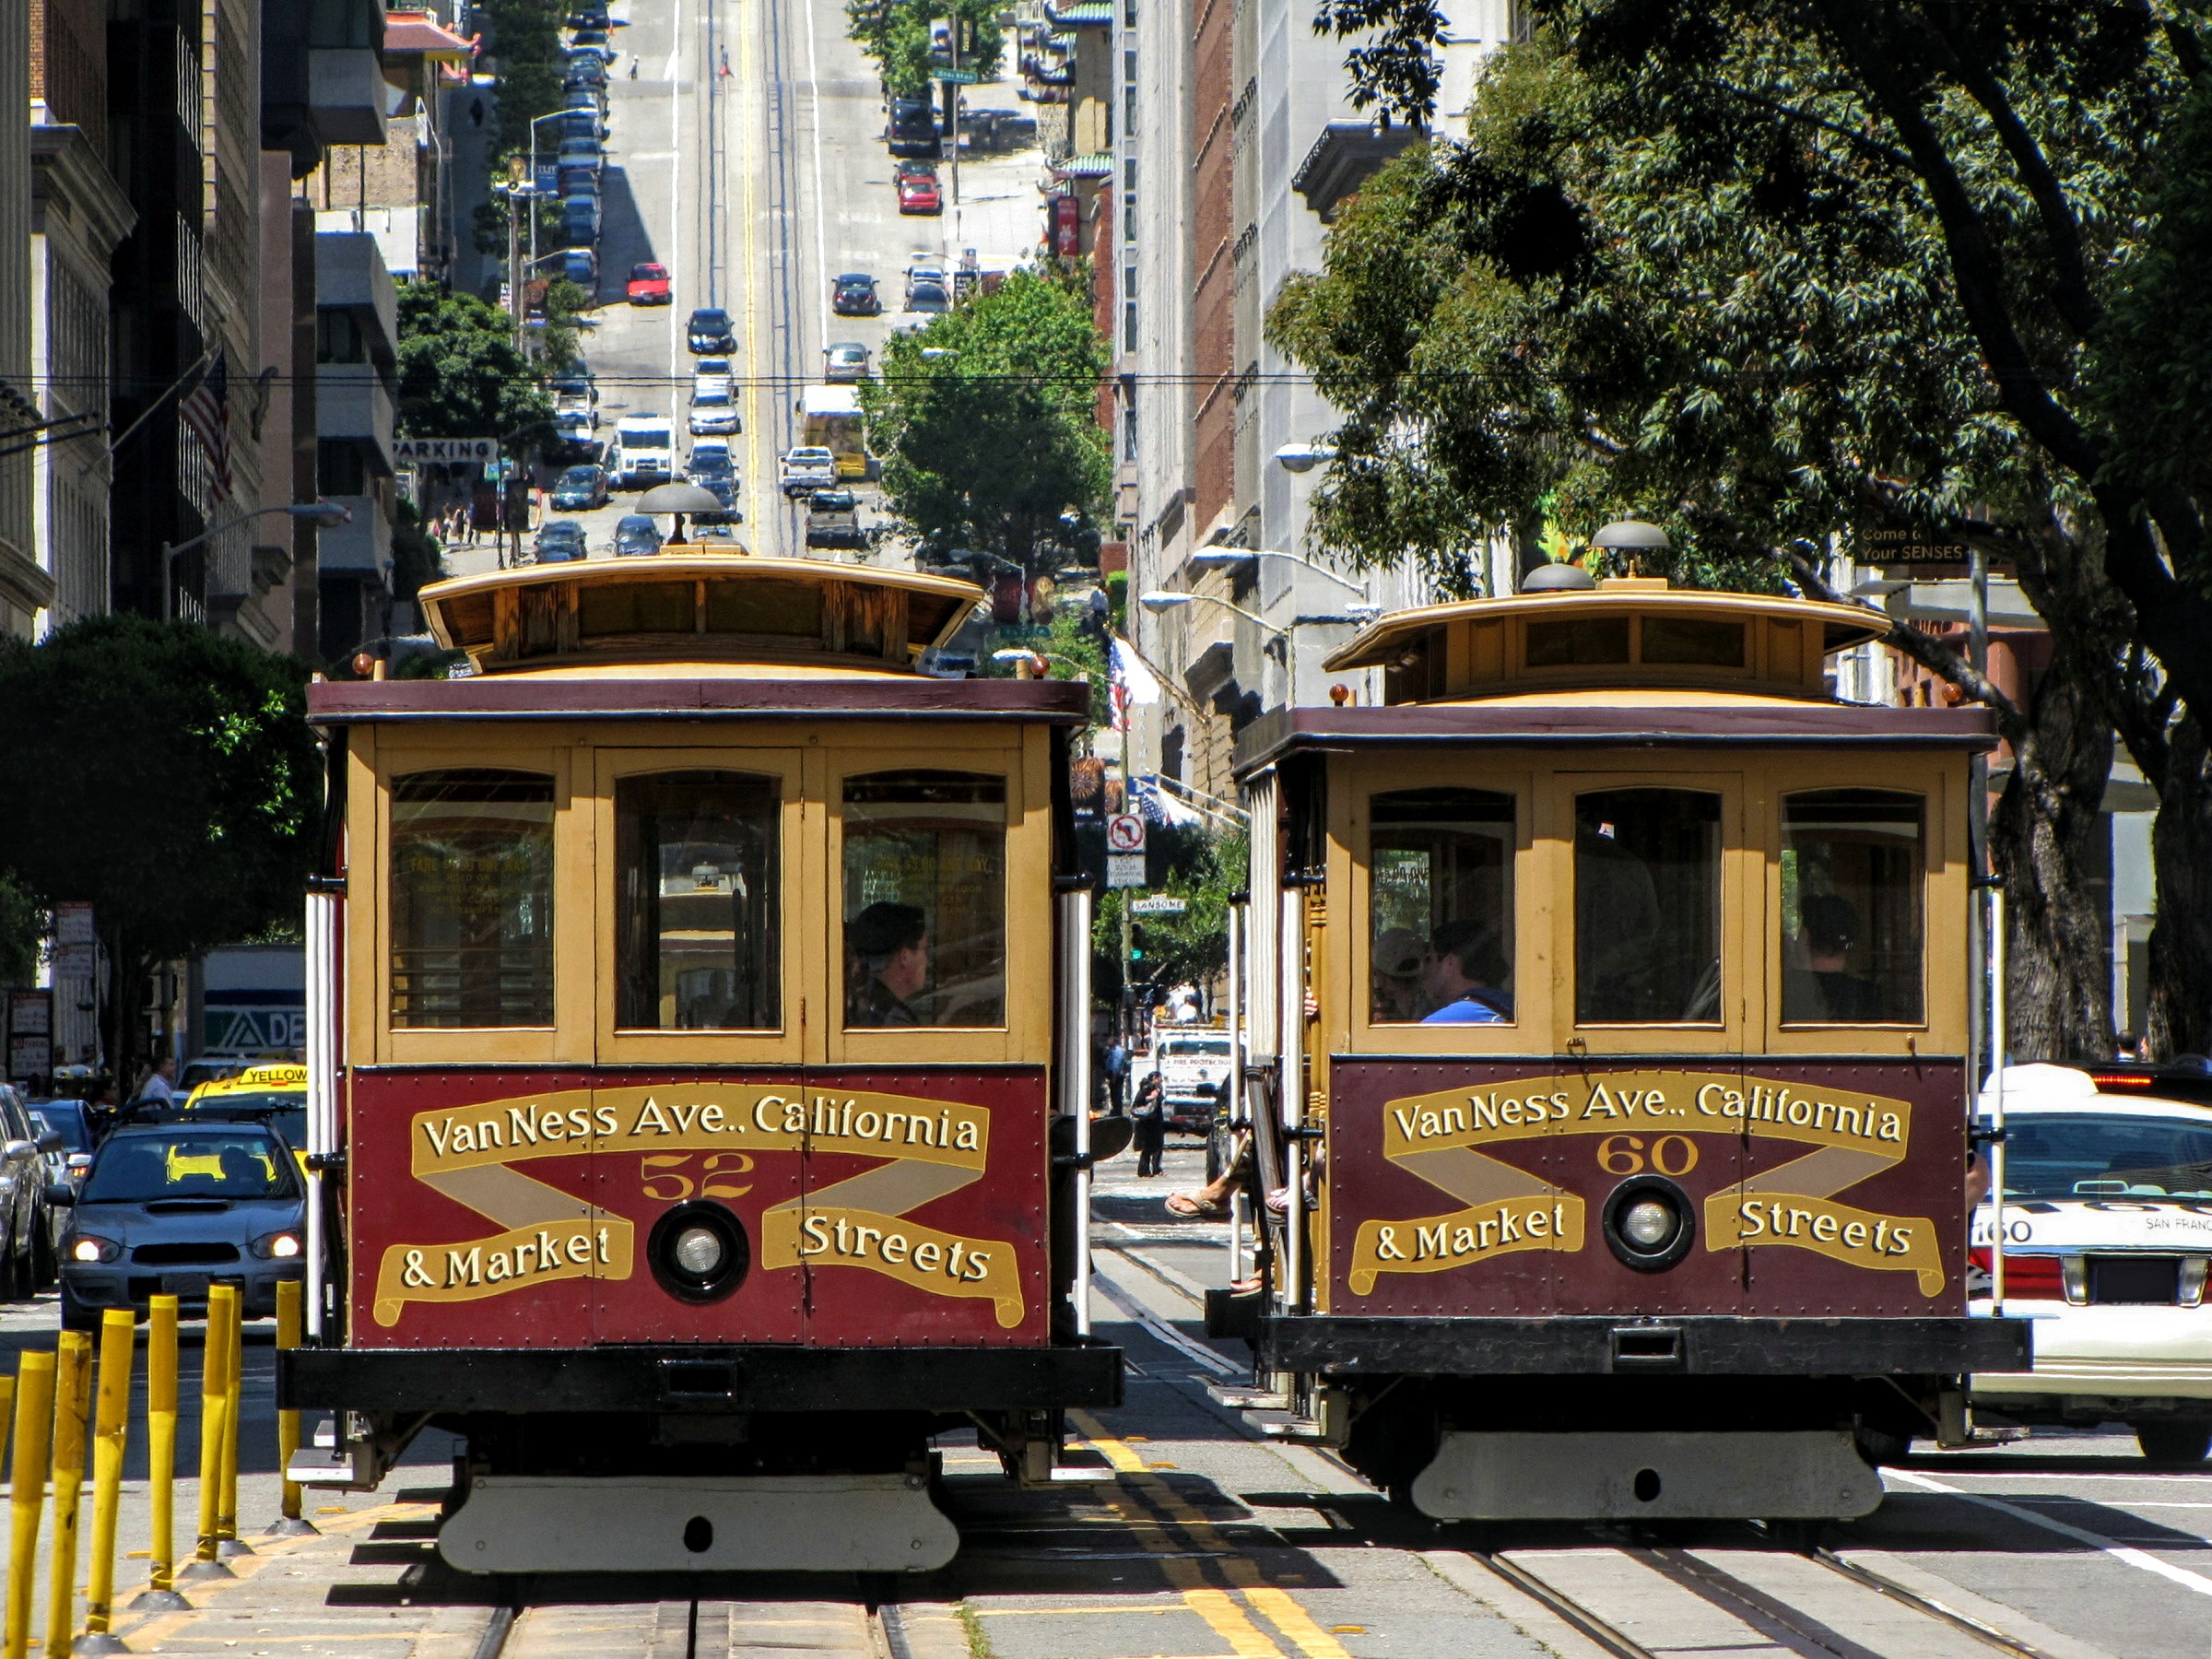 Cable Cars in San Francisco